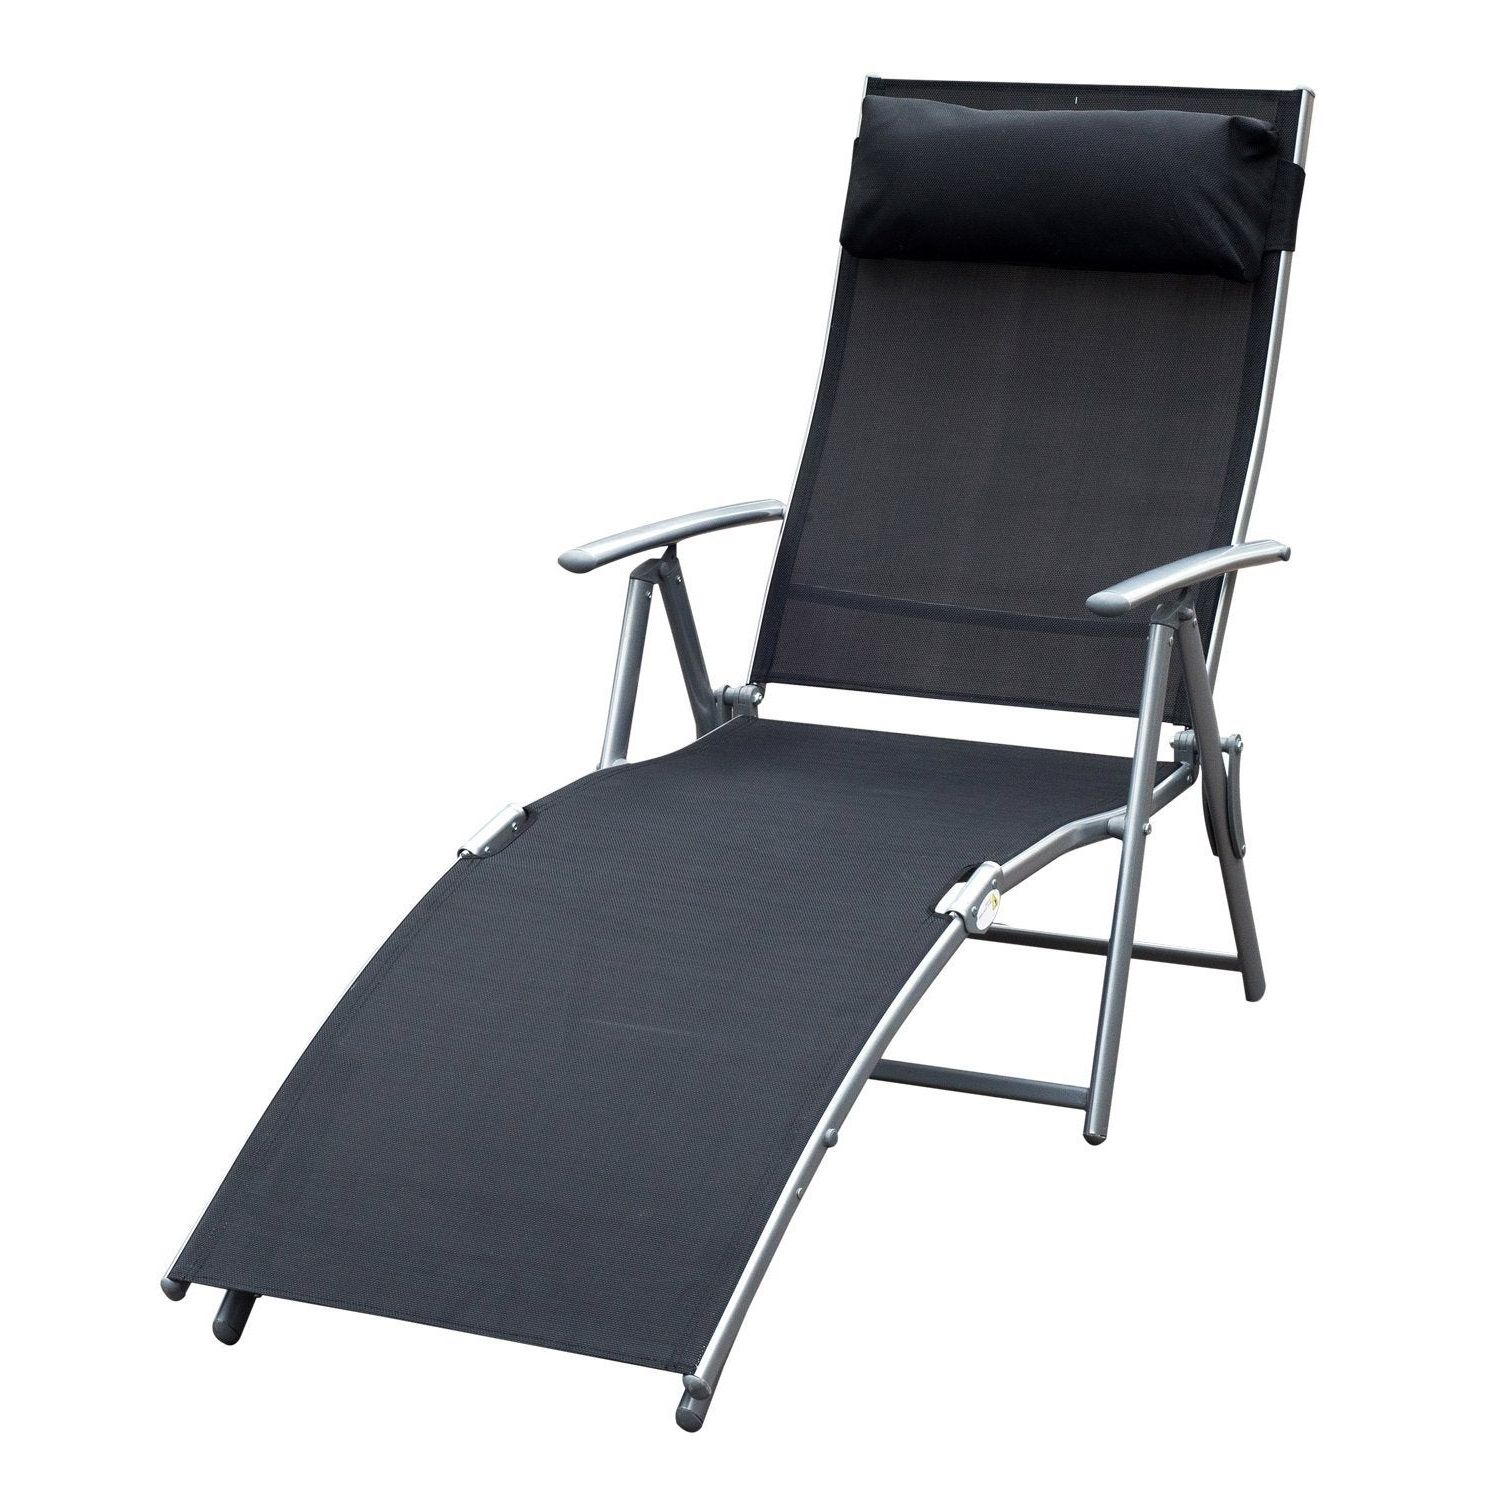 Steel Sling Fabric Outdoor Folding Chaise Lounges In Well Known Outsunny Steel Sling Fabric Outdoor Folding Chaise Lounge Chair Recliner –  Black (View 5 of 25)